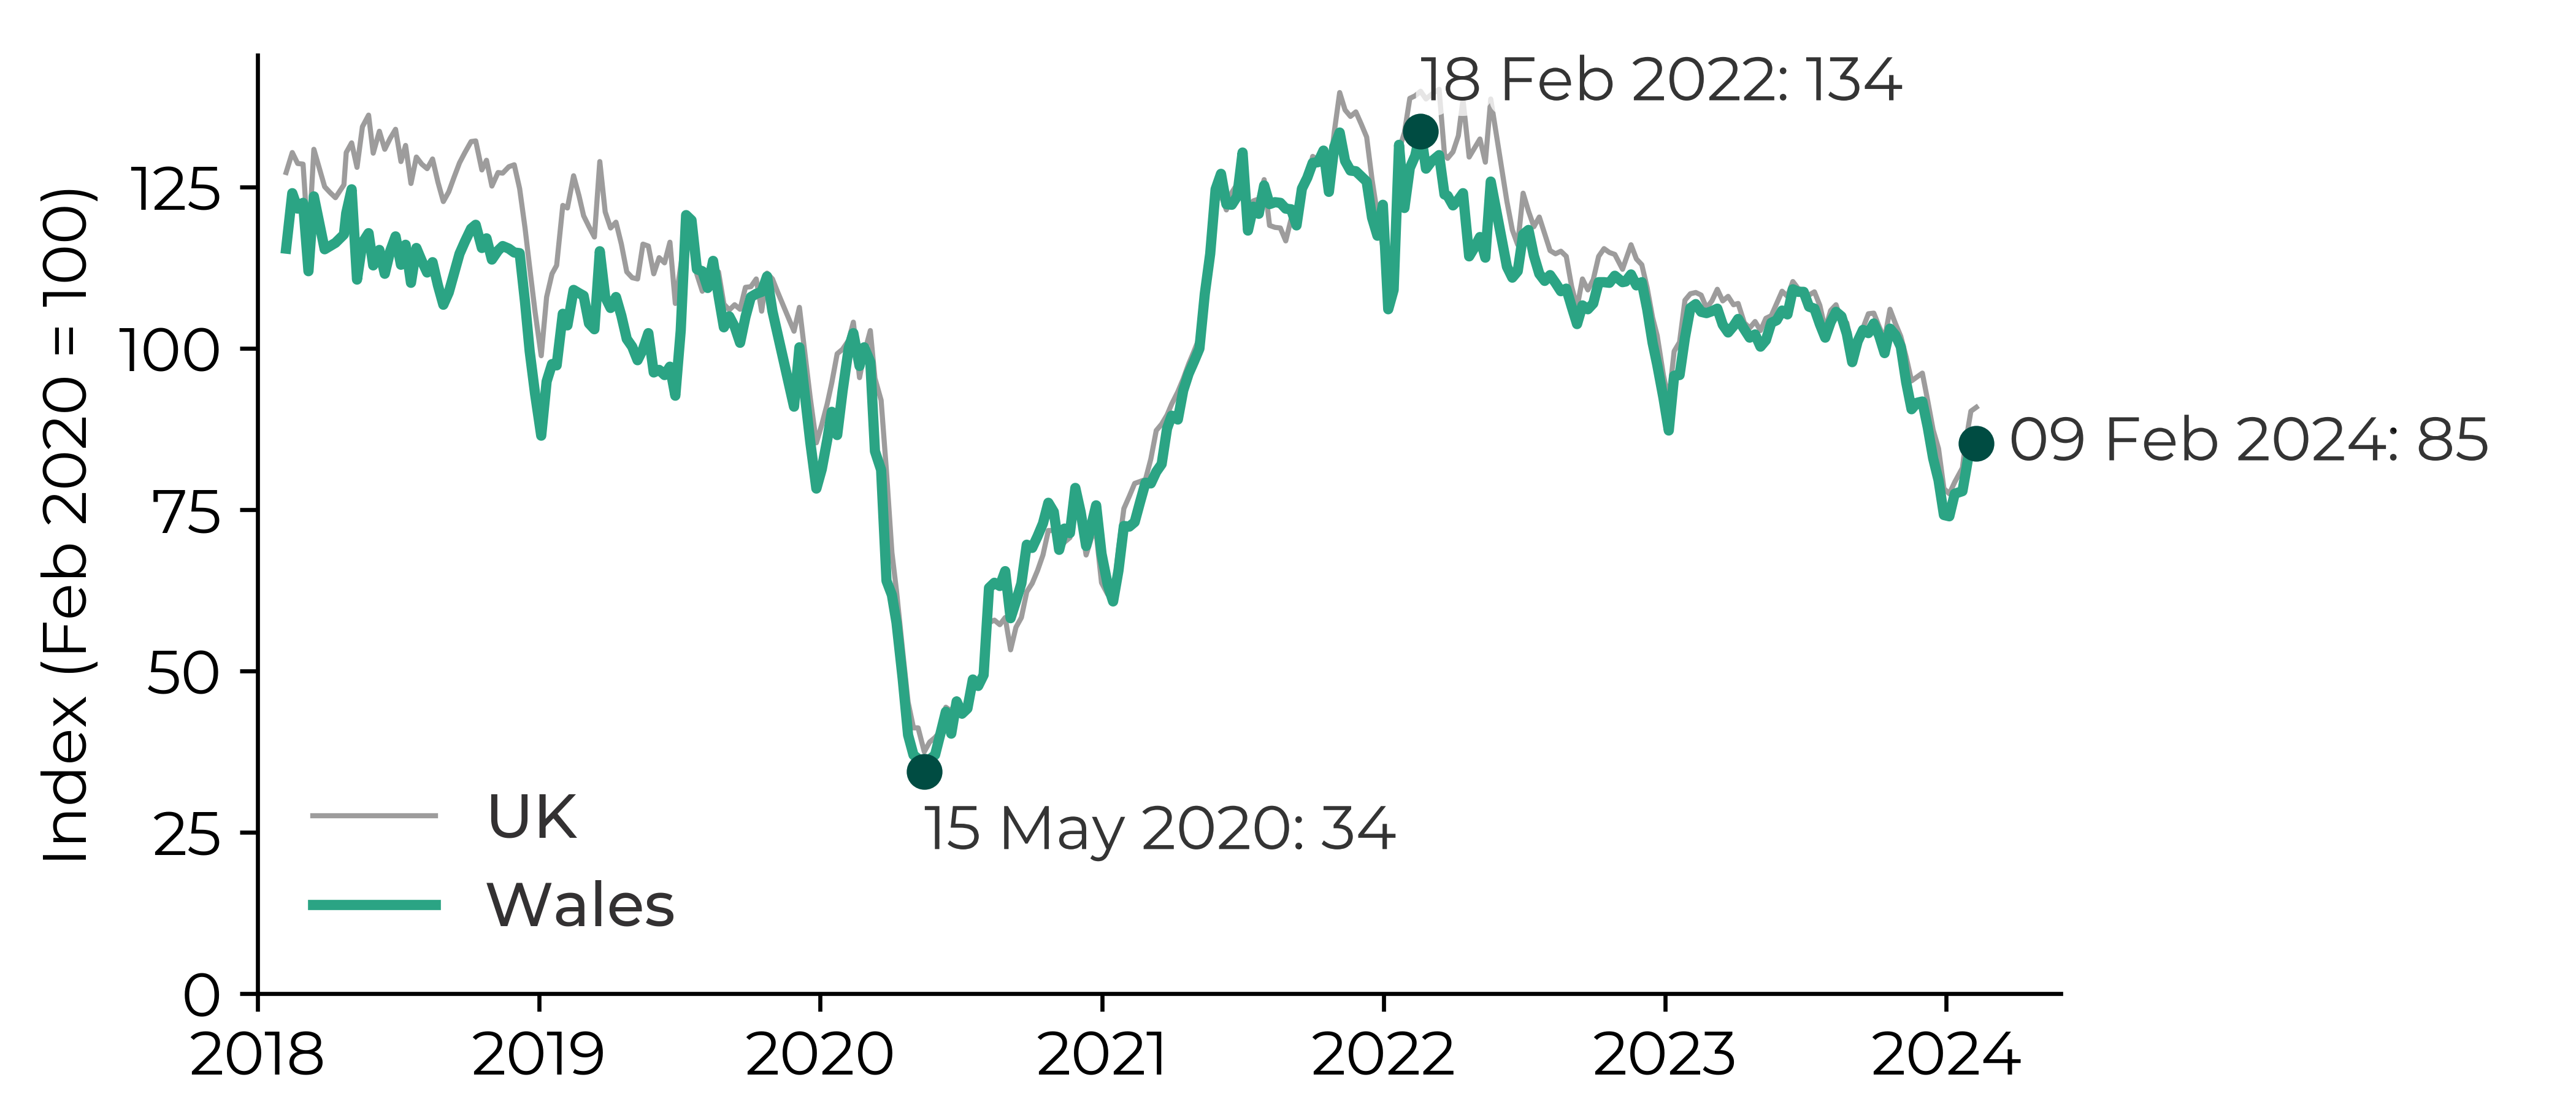 Graph showing that the index decreased from 100 in February 2020 to 34 in May 2020. The index increased to 134 by February 2022 and decreased to 85 by February 2024.